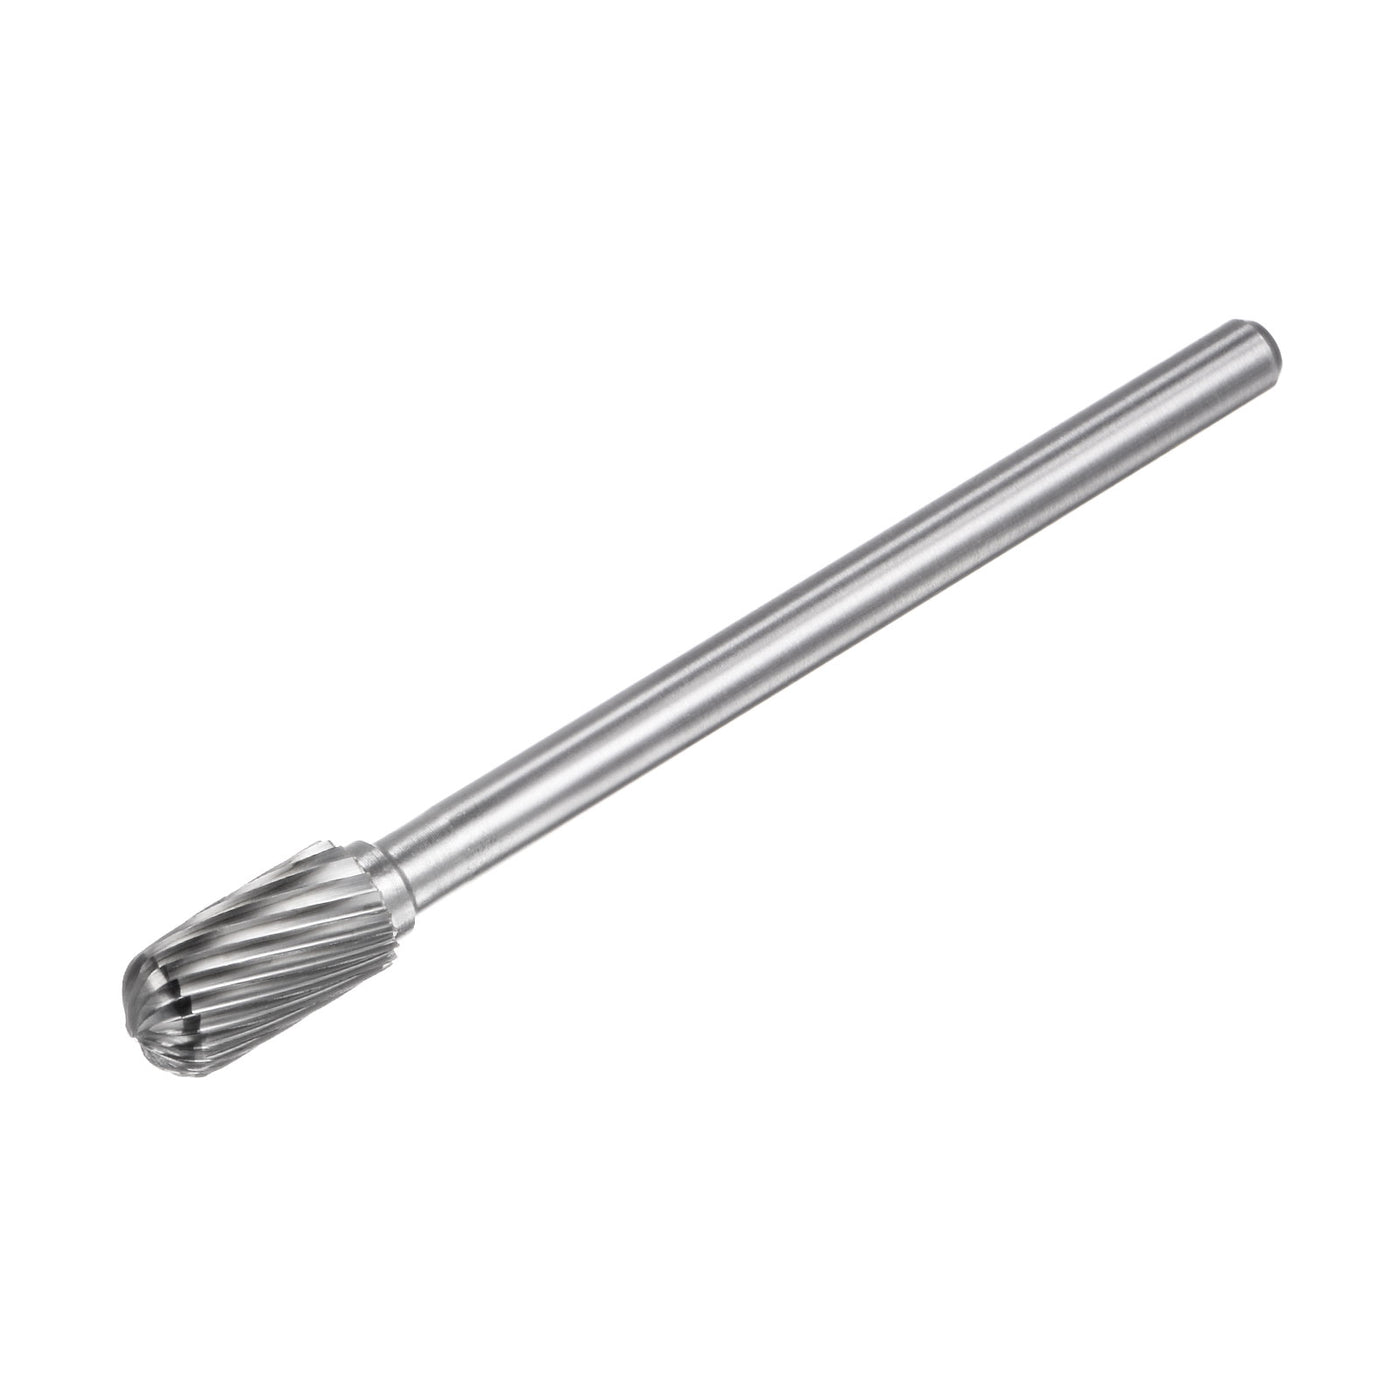 uxcell Uxcell 10mmx100mm 6mm Shank Single Cut Cylinder with Ball Nose Carbide Tip Rotary File